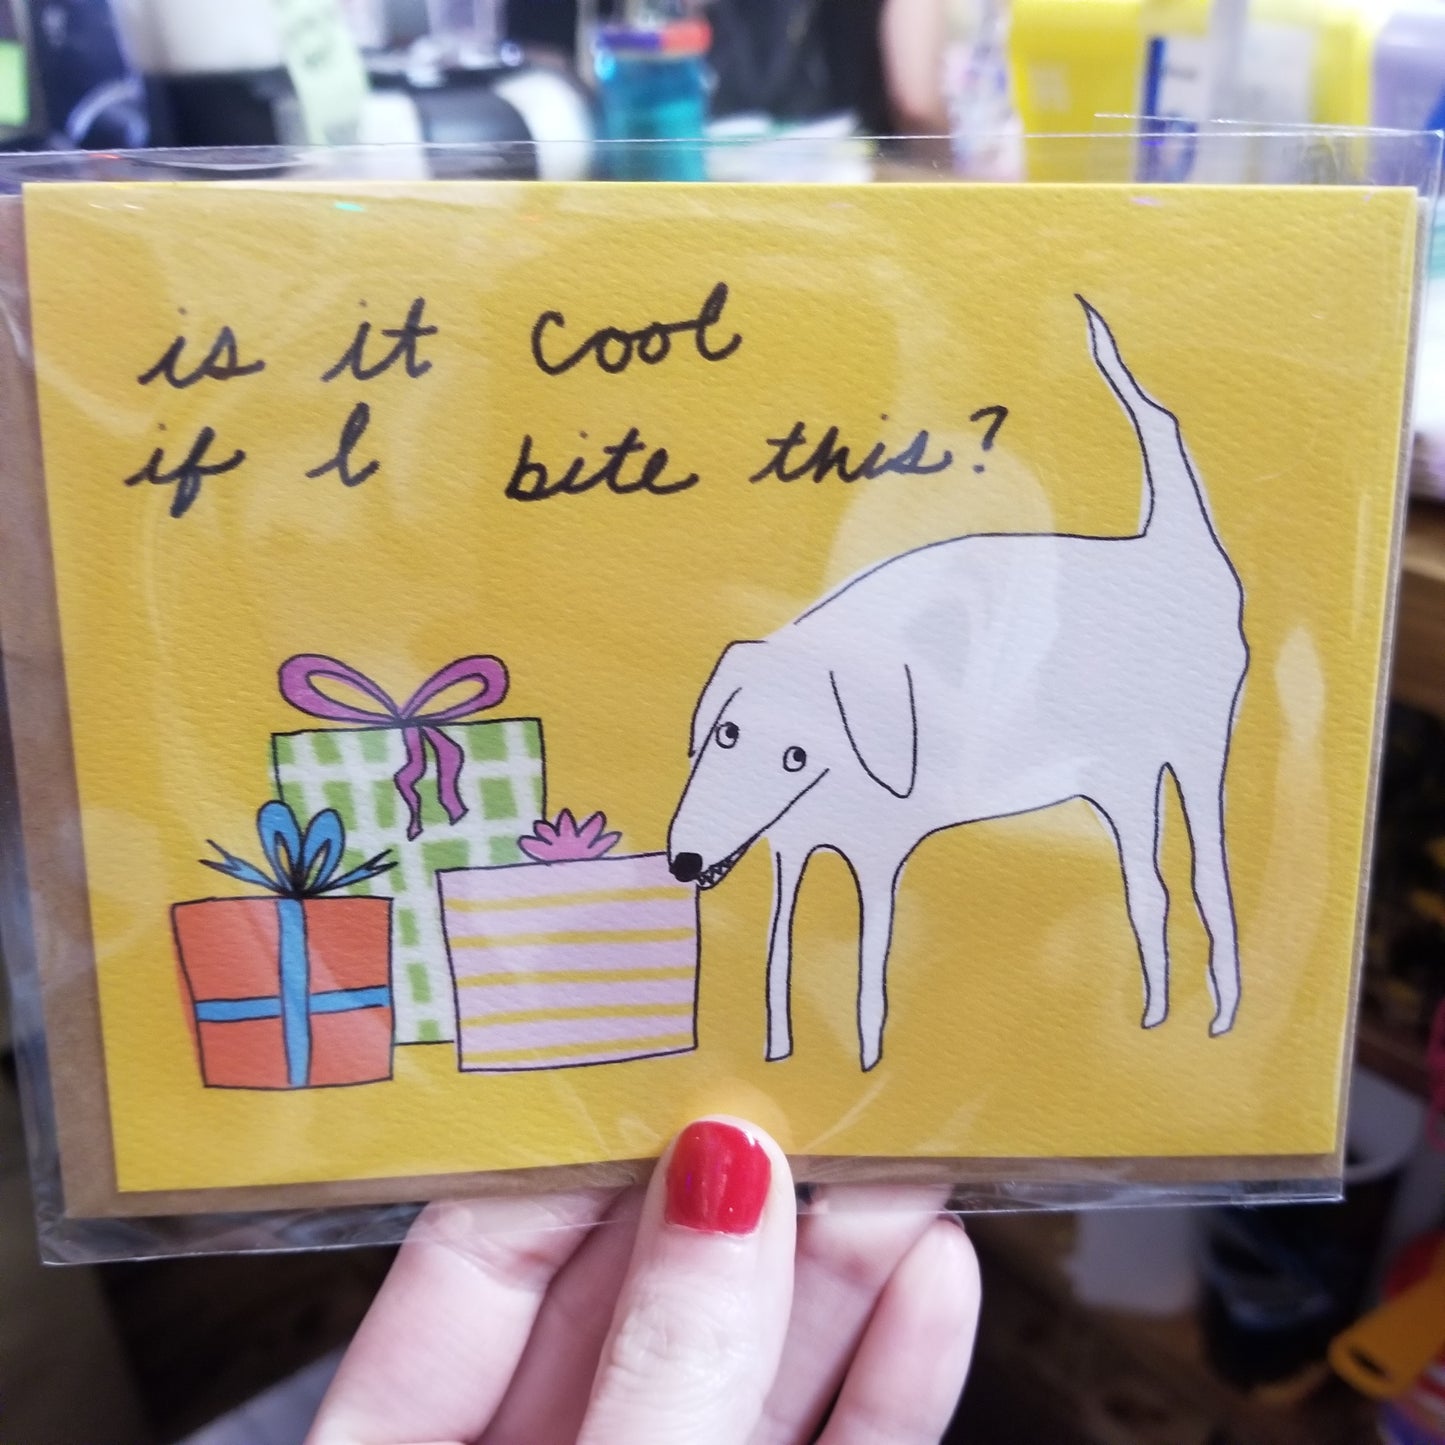 Is it cool if I bite the? dog CARD